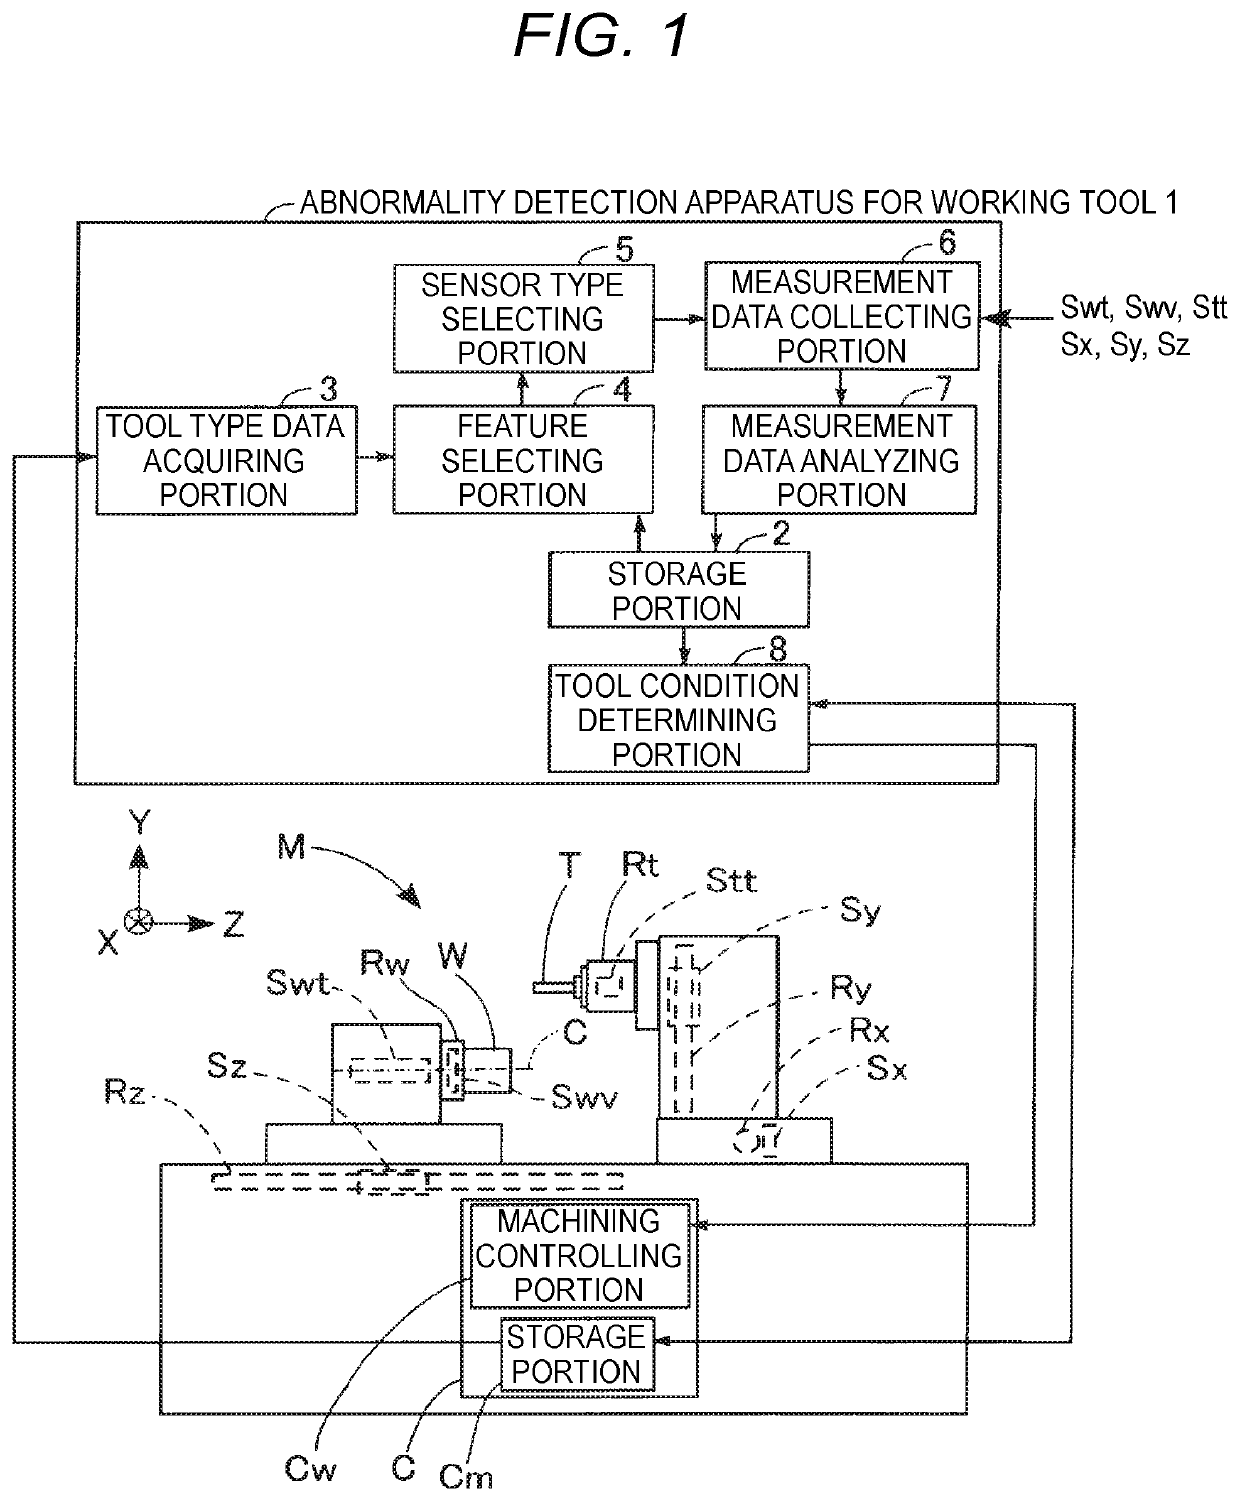 Abnormality detection apparatus for working tools